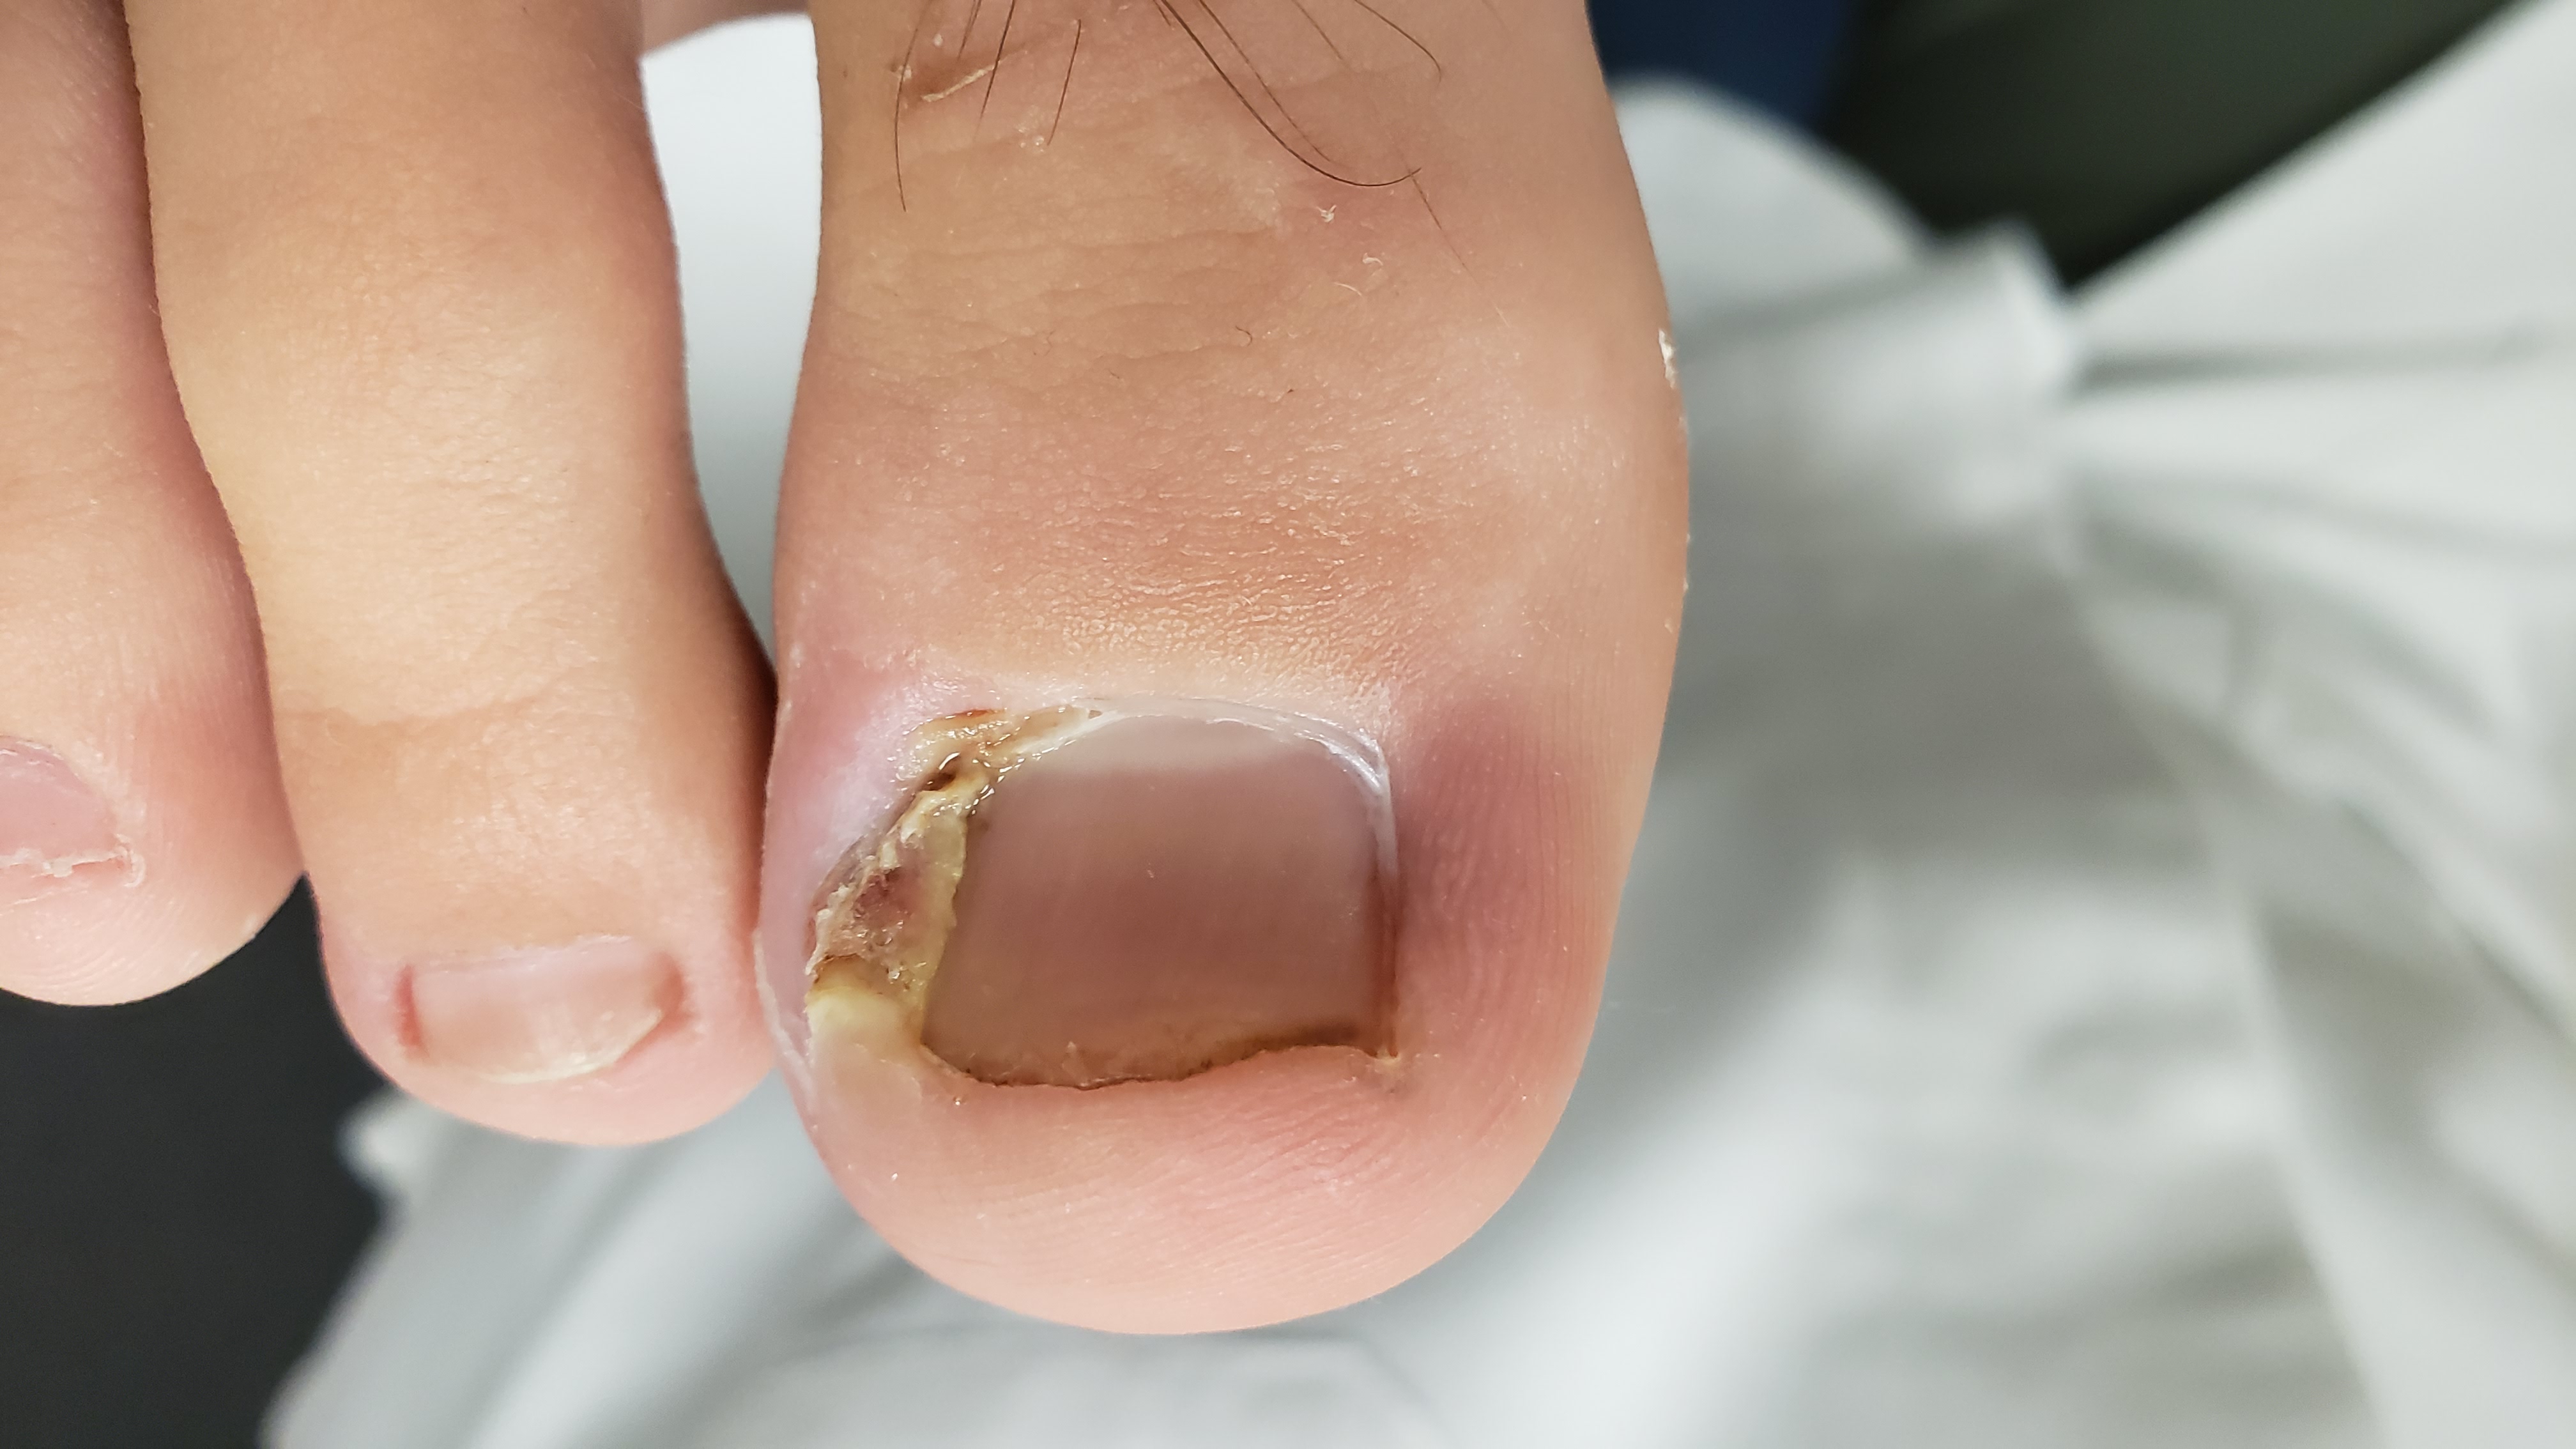 Highlight more than 250 treatment for ingrown toe nail best